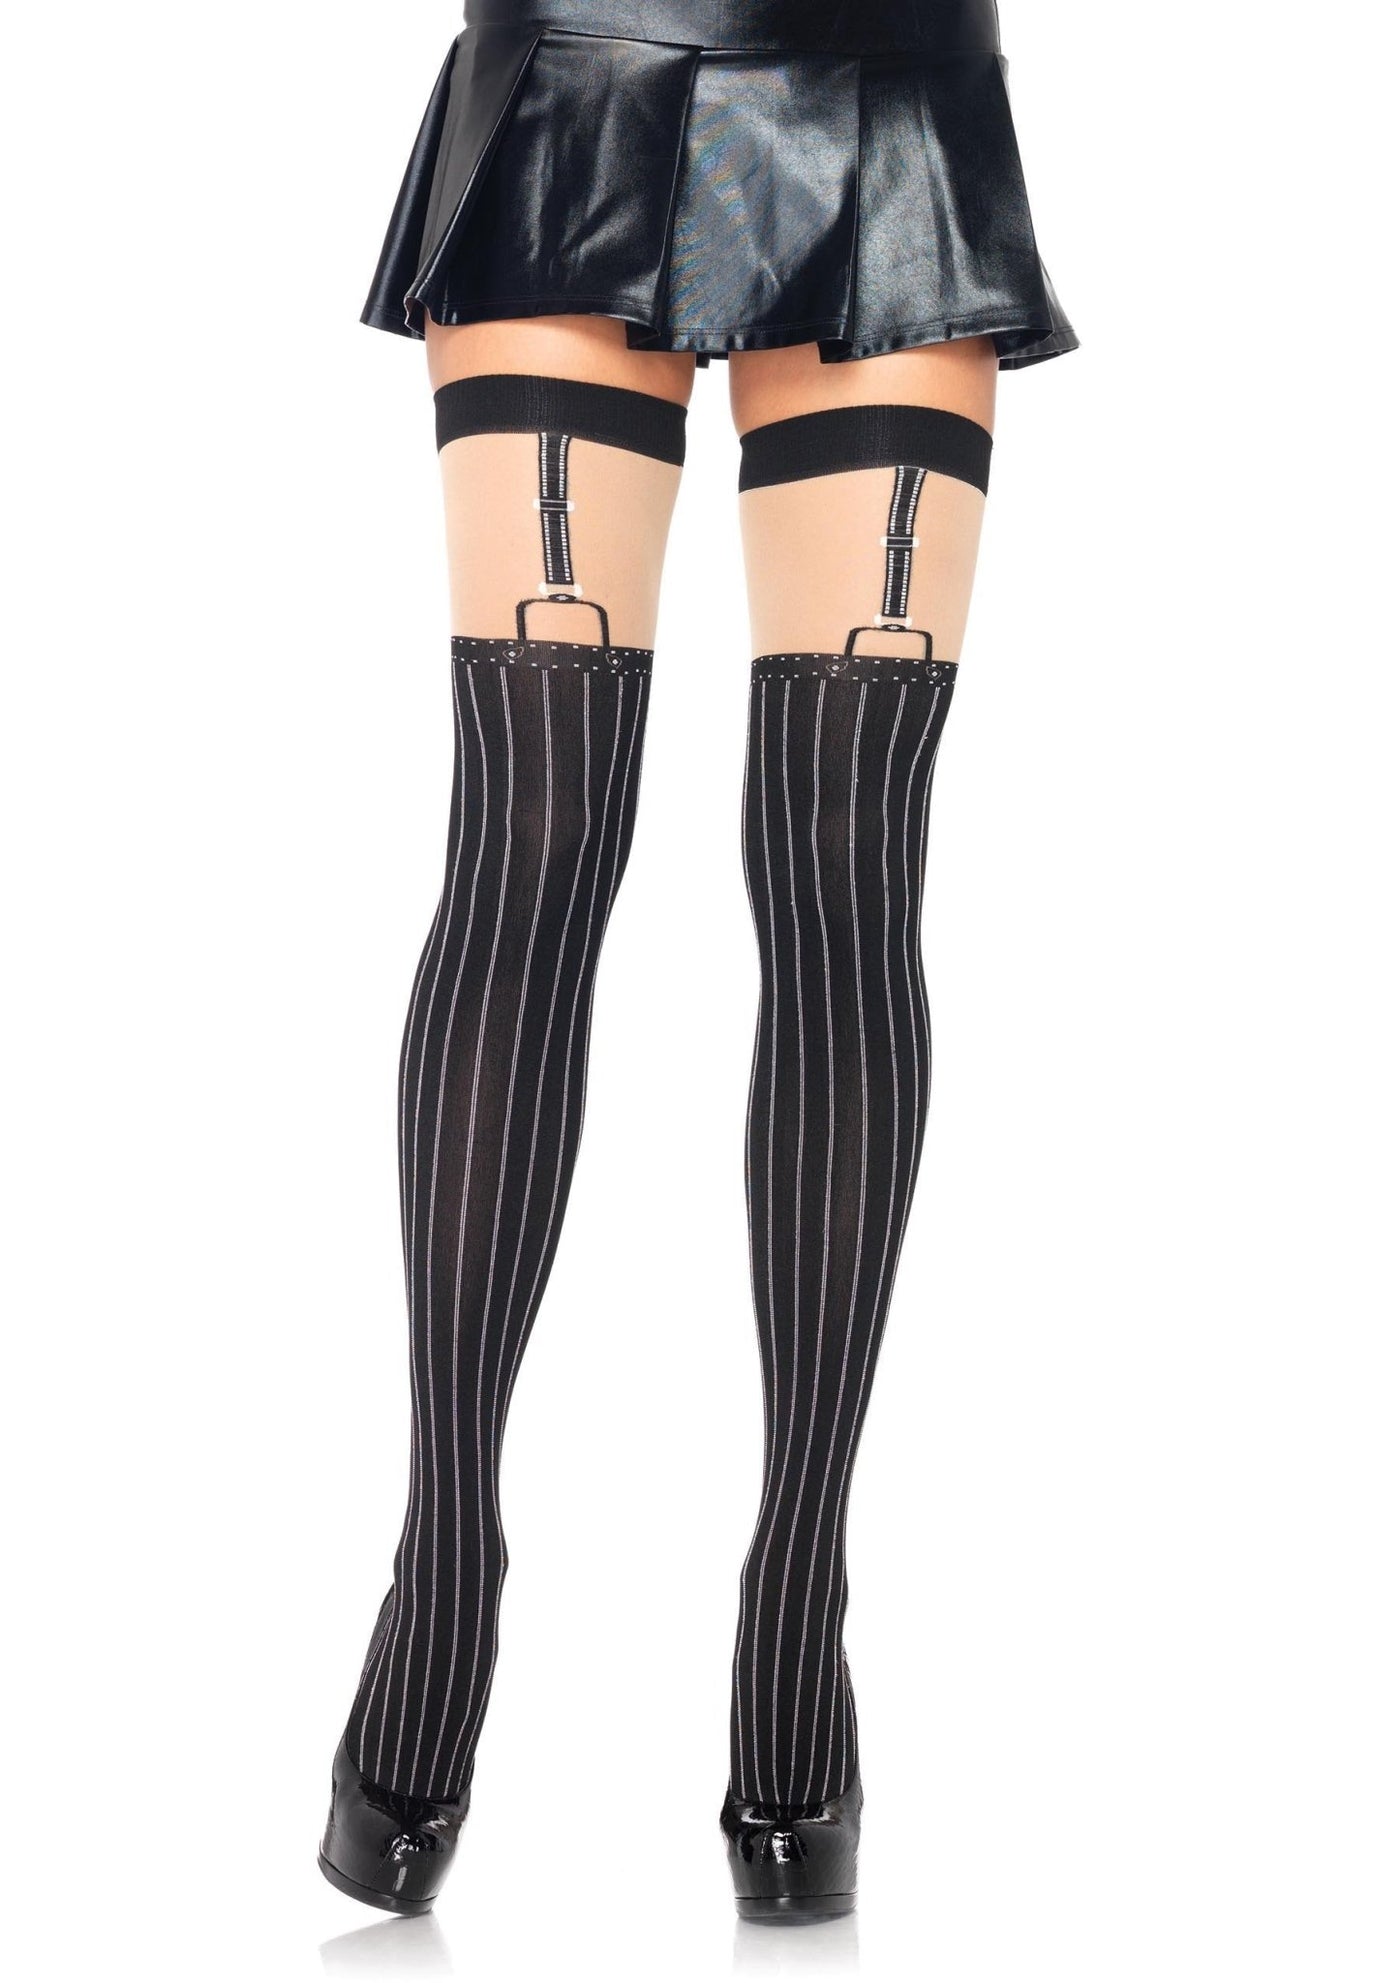 Pinstriped Suspender Thigh Highs - JJ's Party House